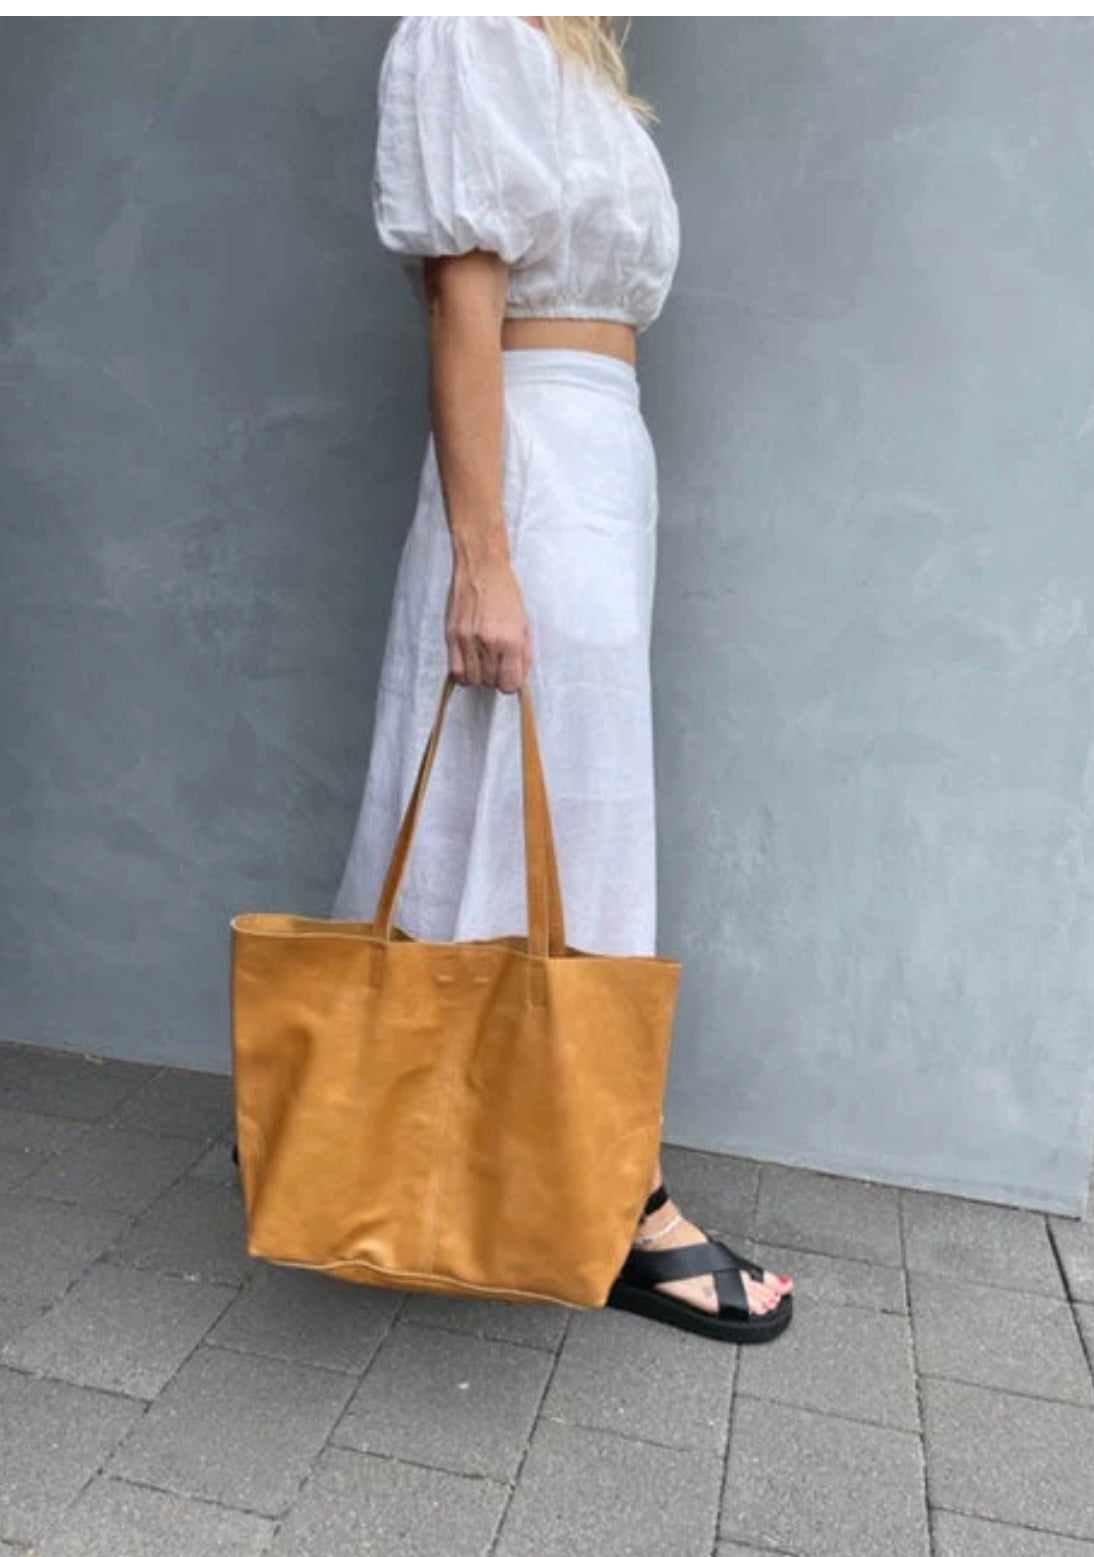 Bare Leather her London Tote